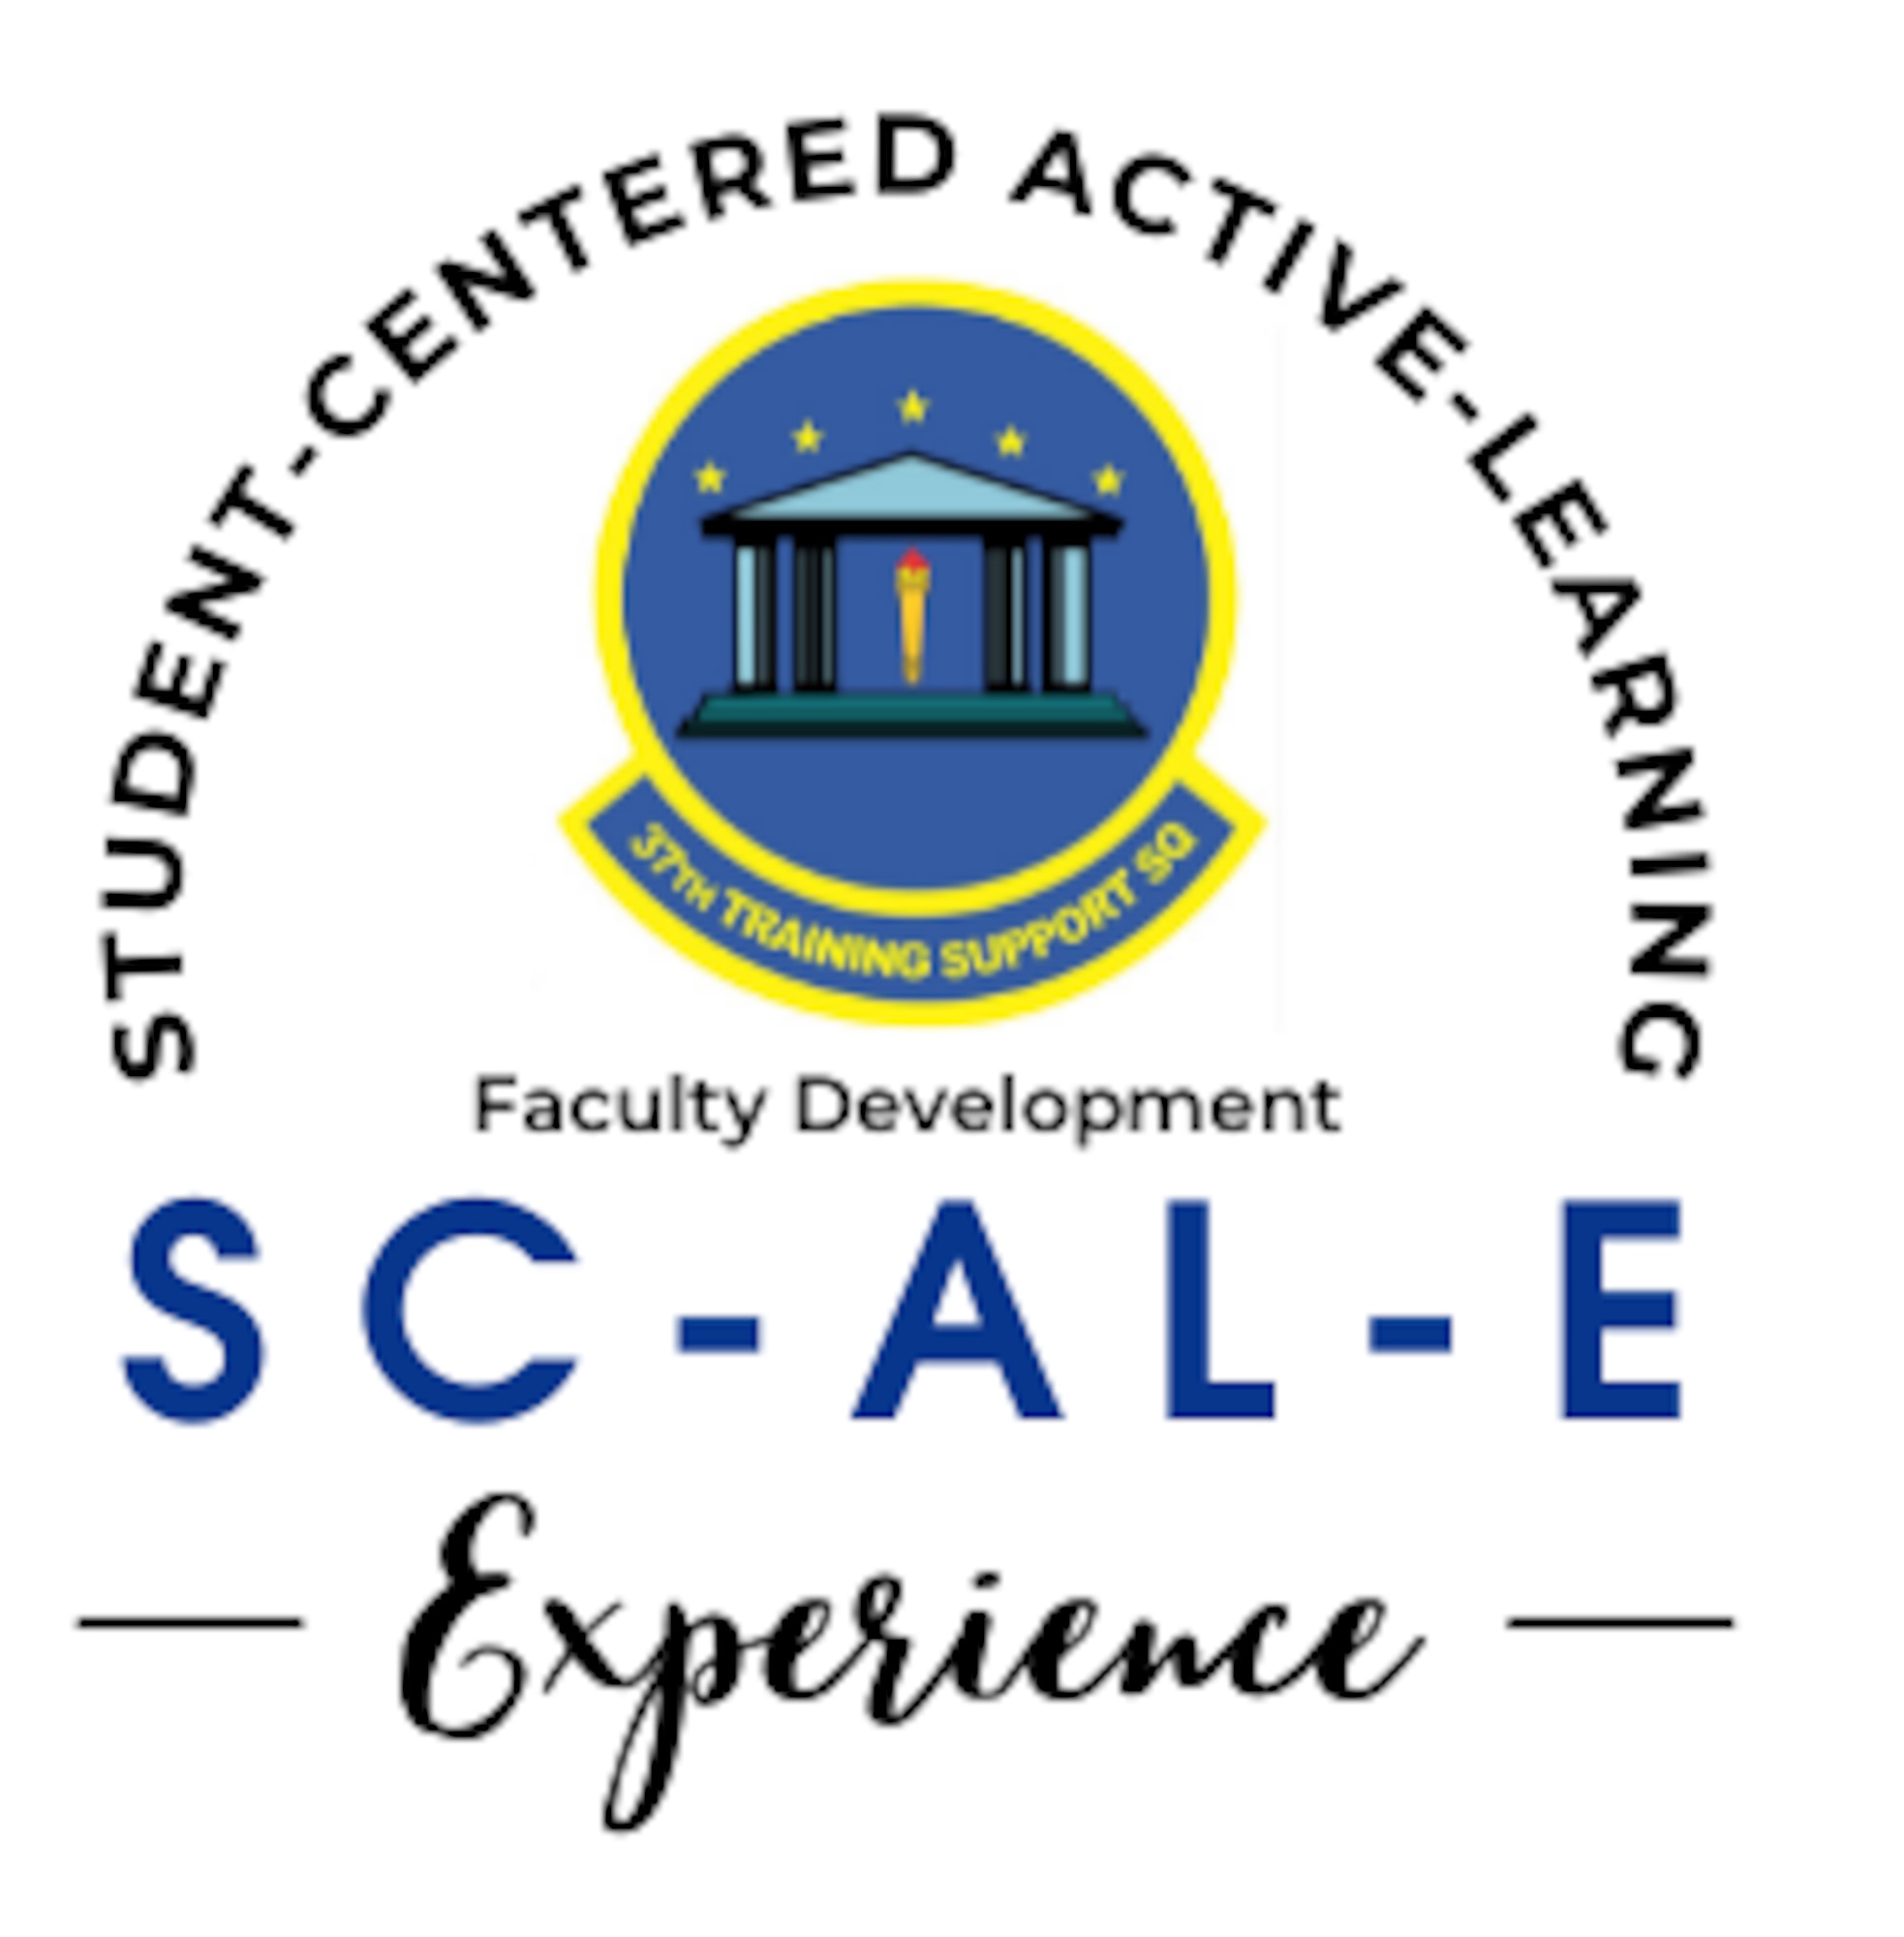 Student-Centered Active Learning Experience (SC-AL-E)